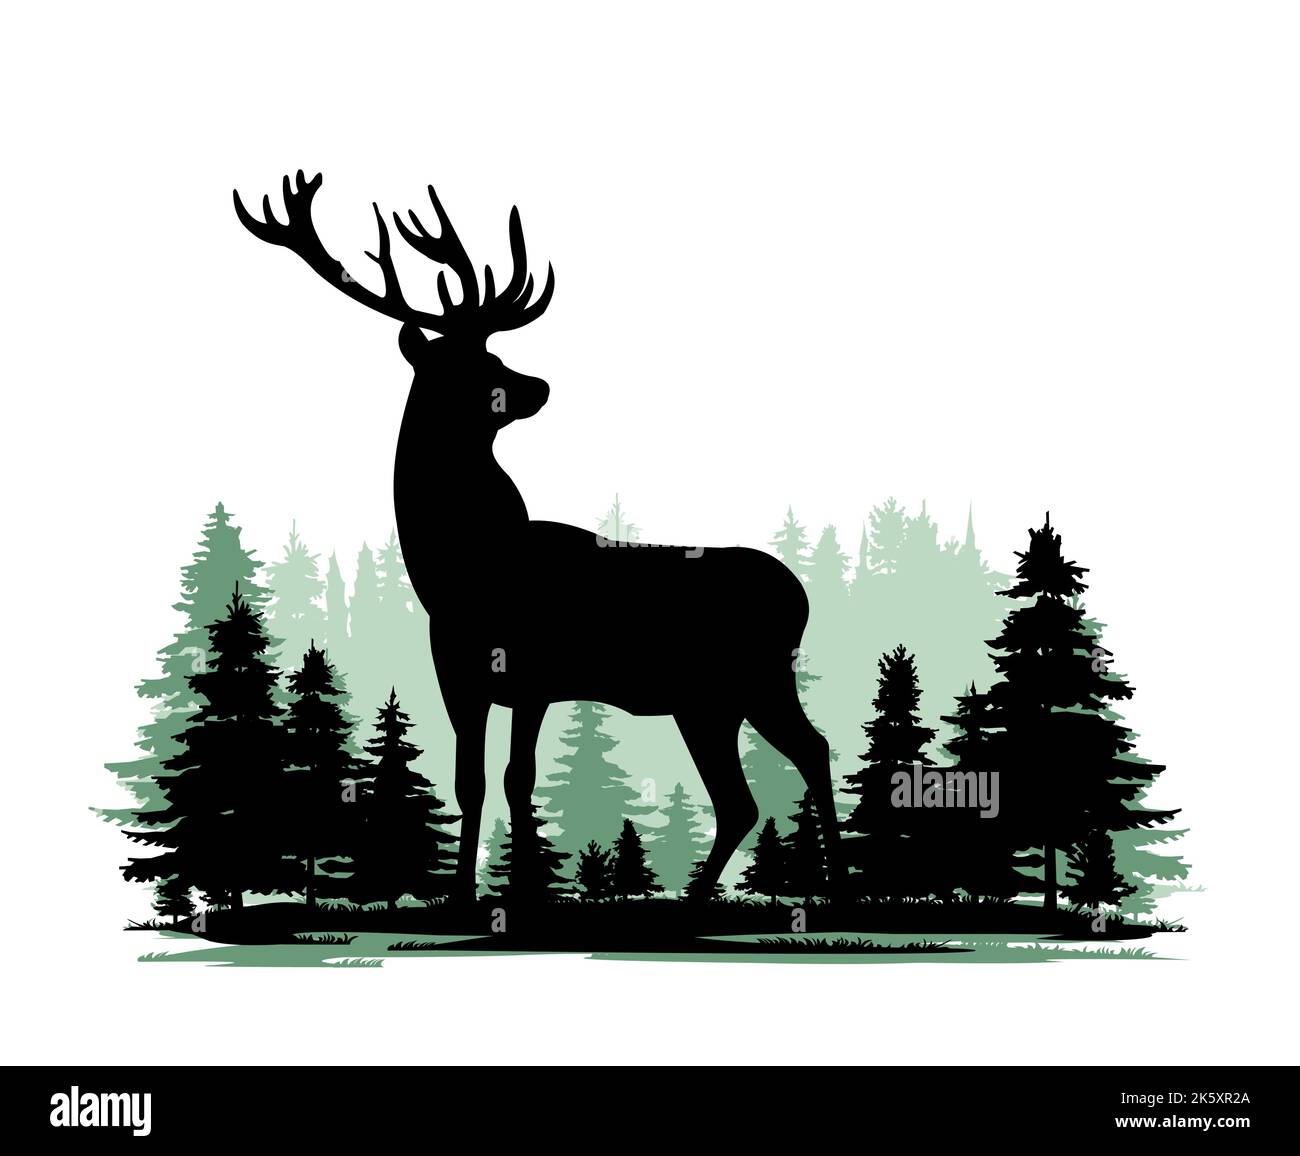 Adult male deer. Wild animals. Silhouette figures. Glade in coniferous northern forest taiga. Isolated on white background. Vector. Stock Vector